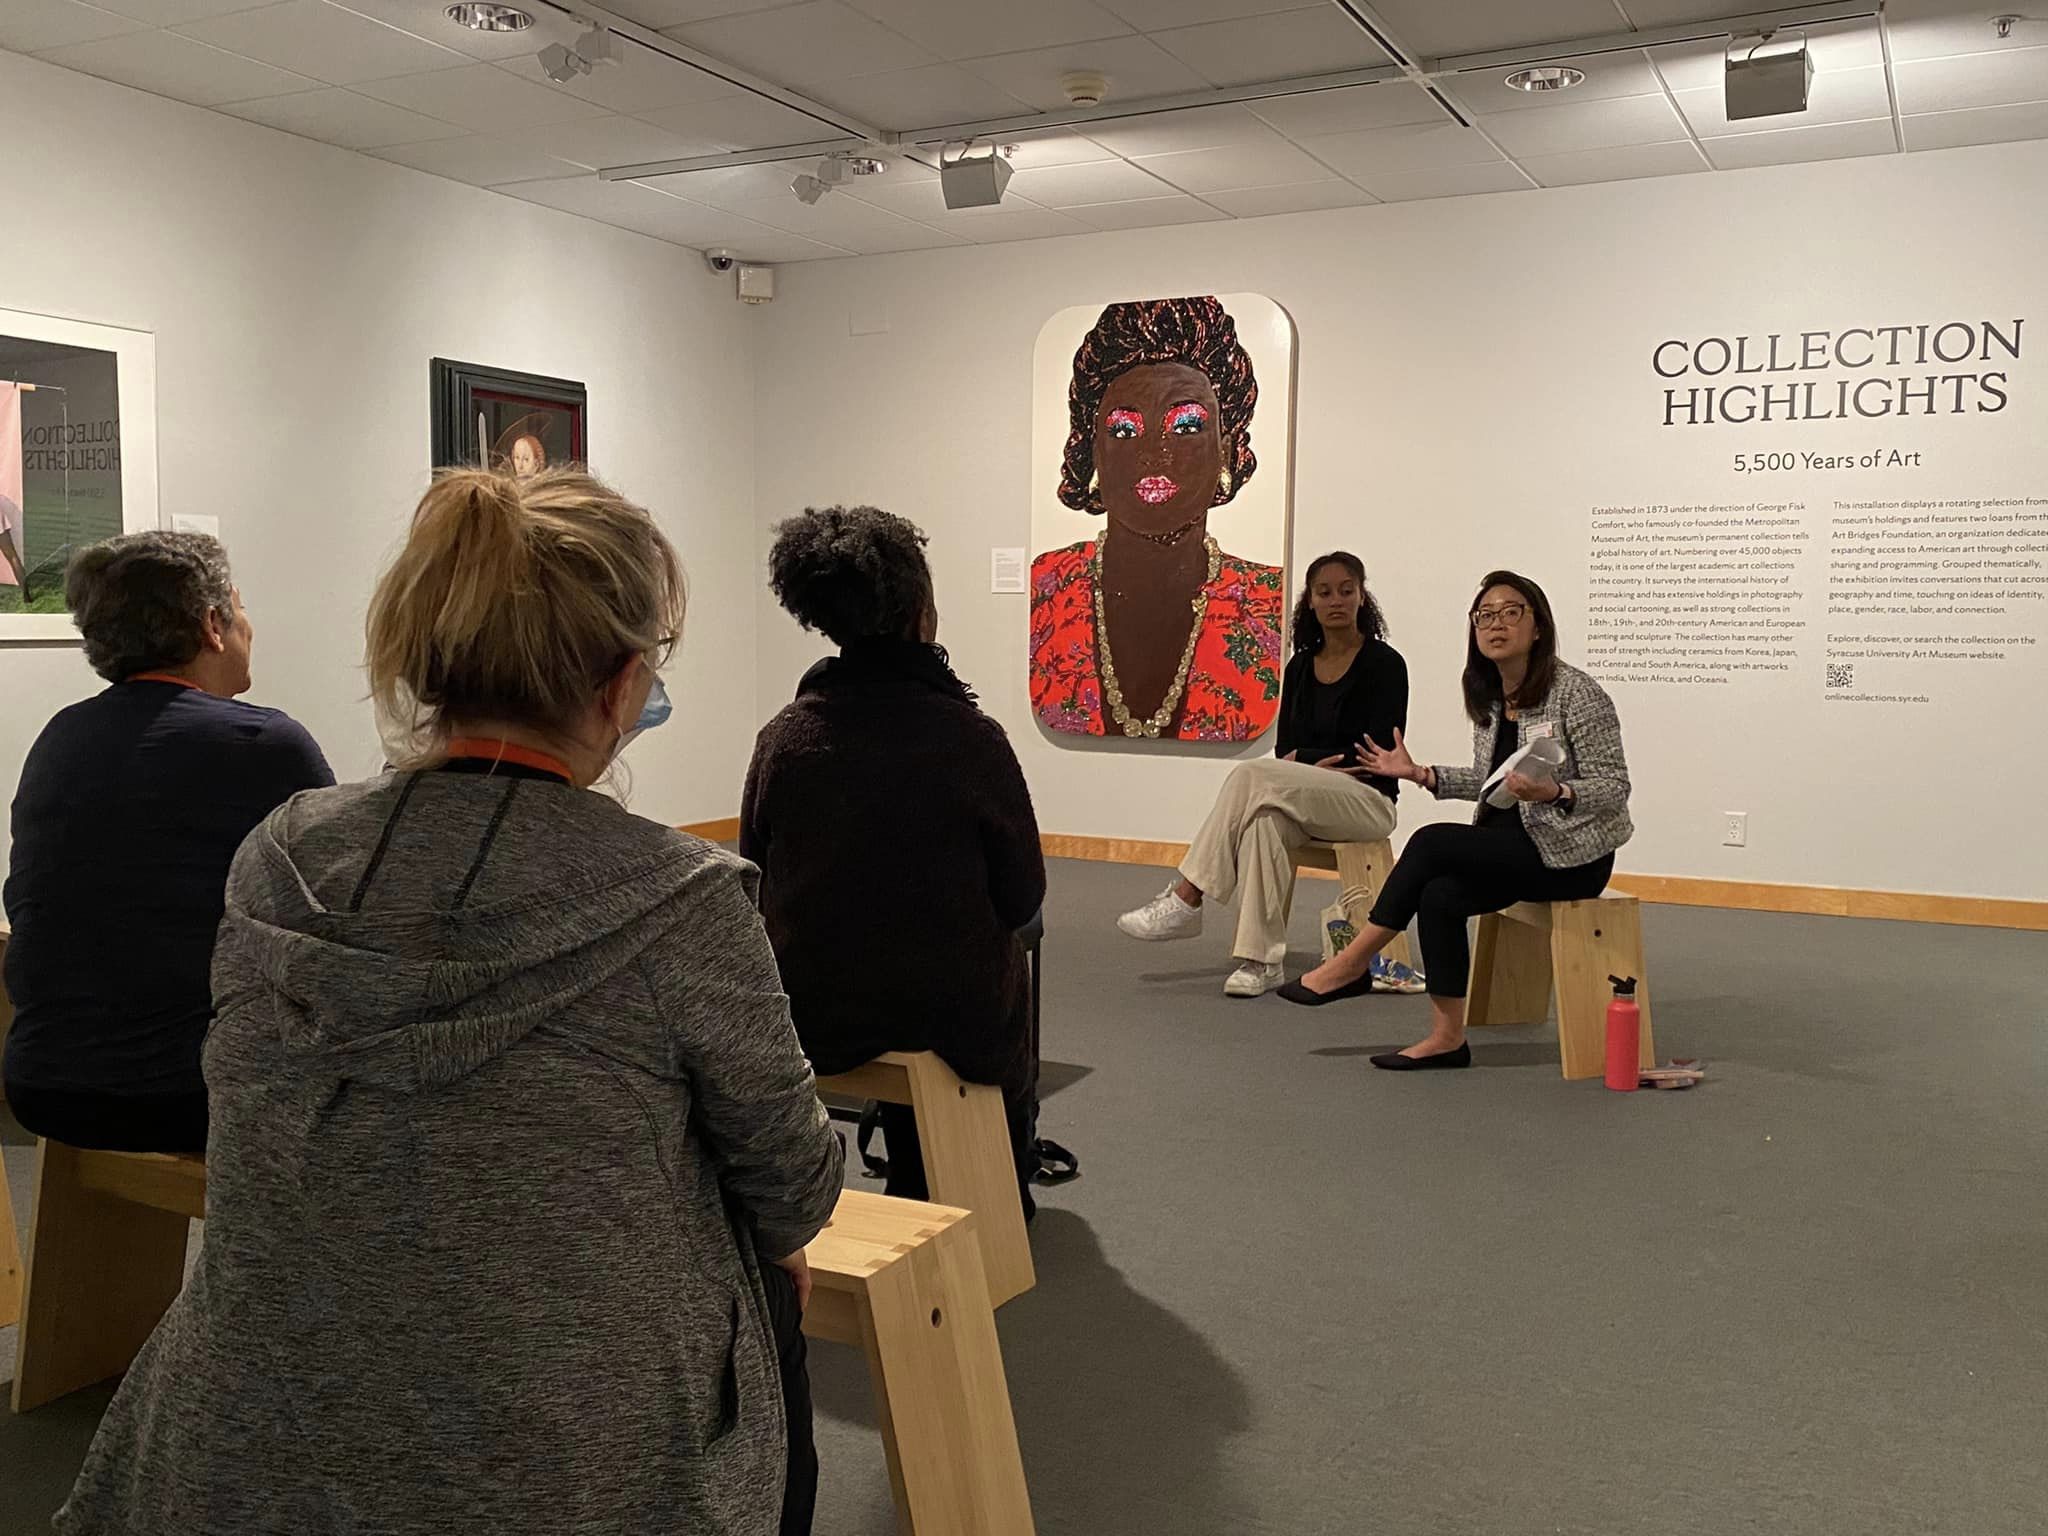 Back in the Clasroom: The museum as a classroom. A conversation around artist Mickalene Thomas’ Portrait of Qusuquzah #5 (2011)